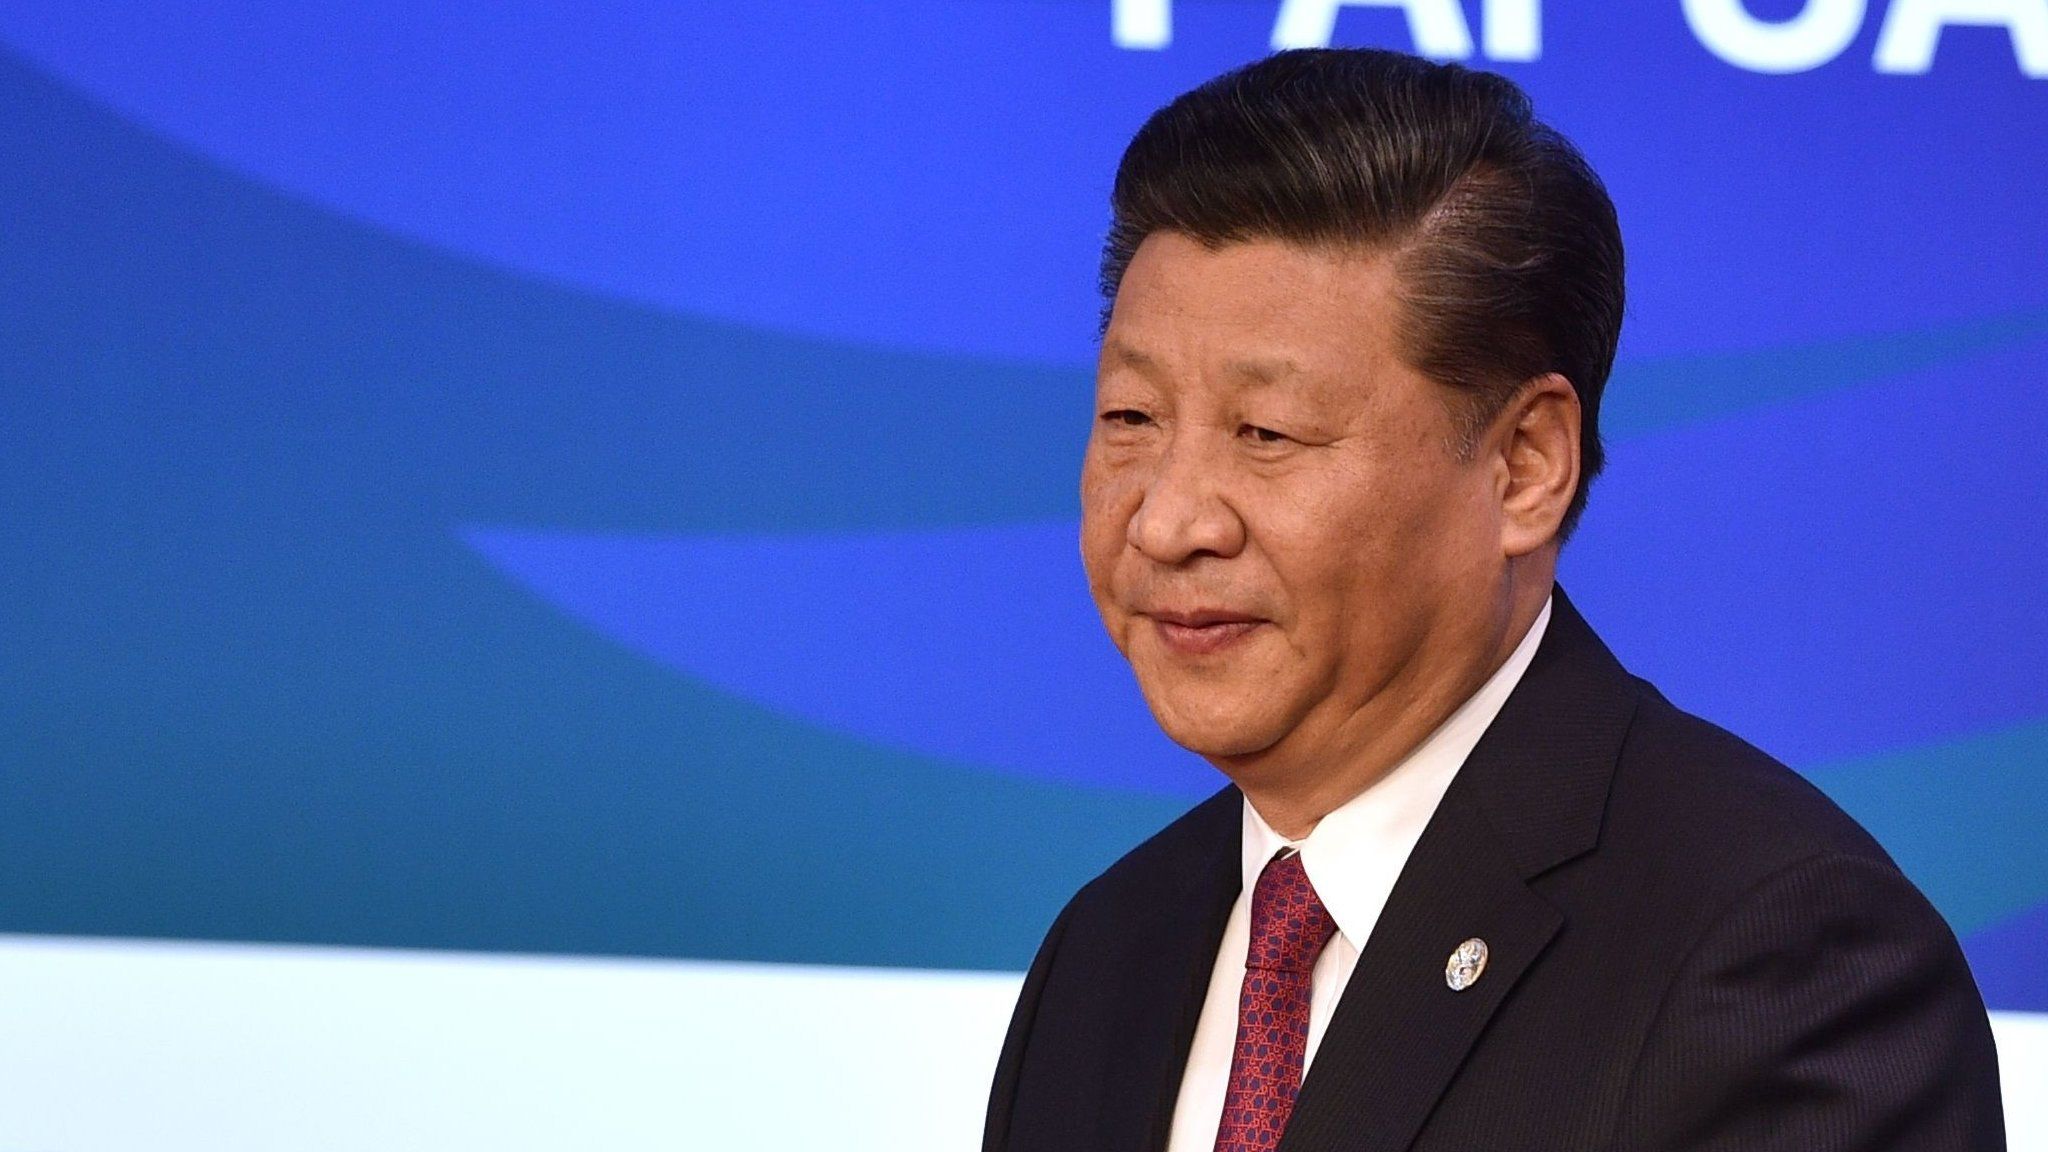 Chinese President Xi Jinping makes his keynote speech for the CEO Summit of the Asia-Pacific Economic Cooperation (APEC) summit in Port Moresby on November 17, 2018.